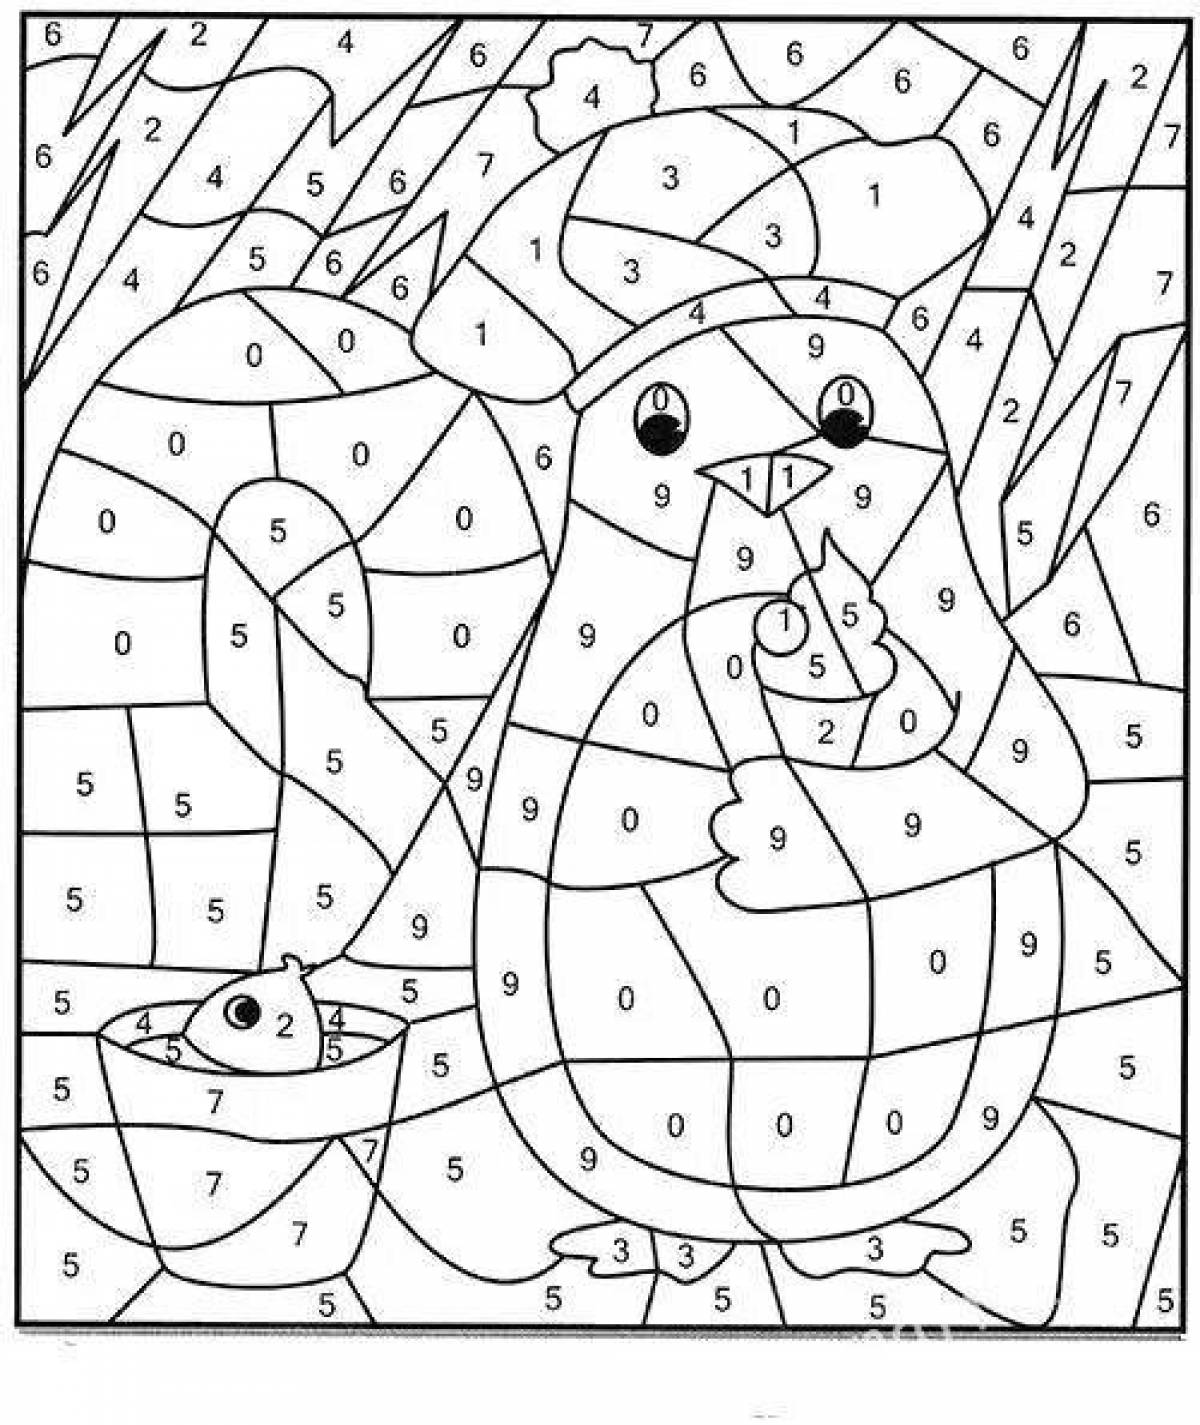 Playful coloring book with letters